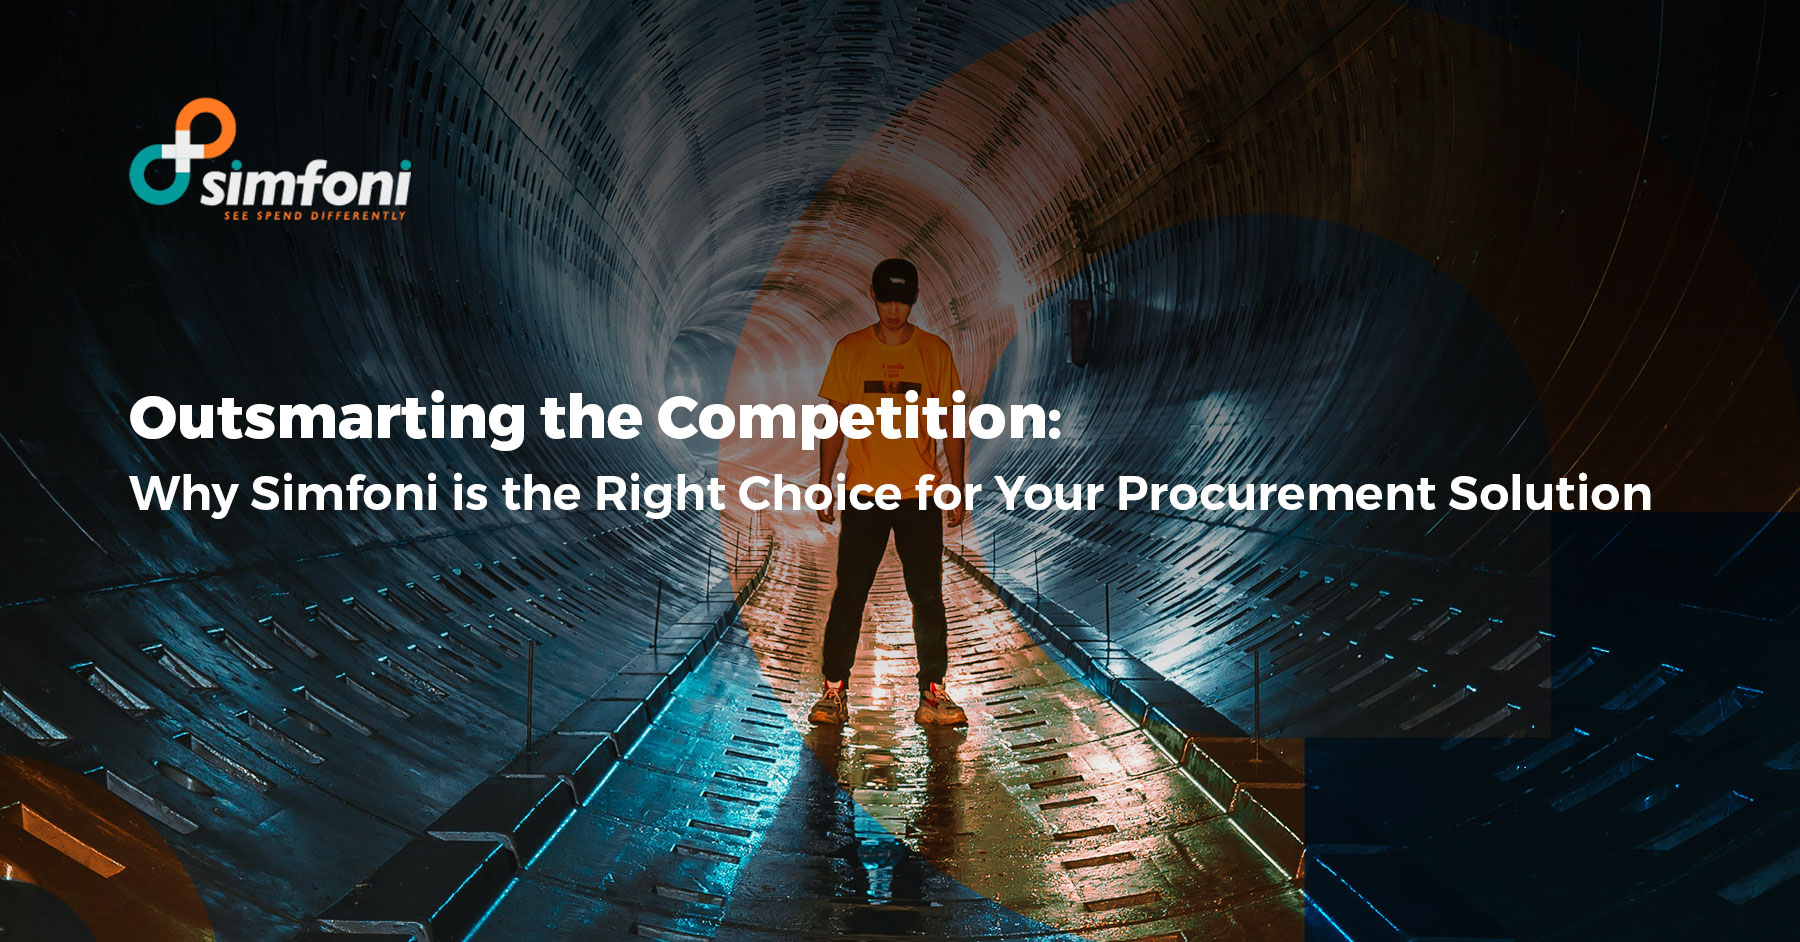 Outsmarting the Competition: Why Simfoni is the Right Choice for Your Procurement Solution